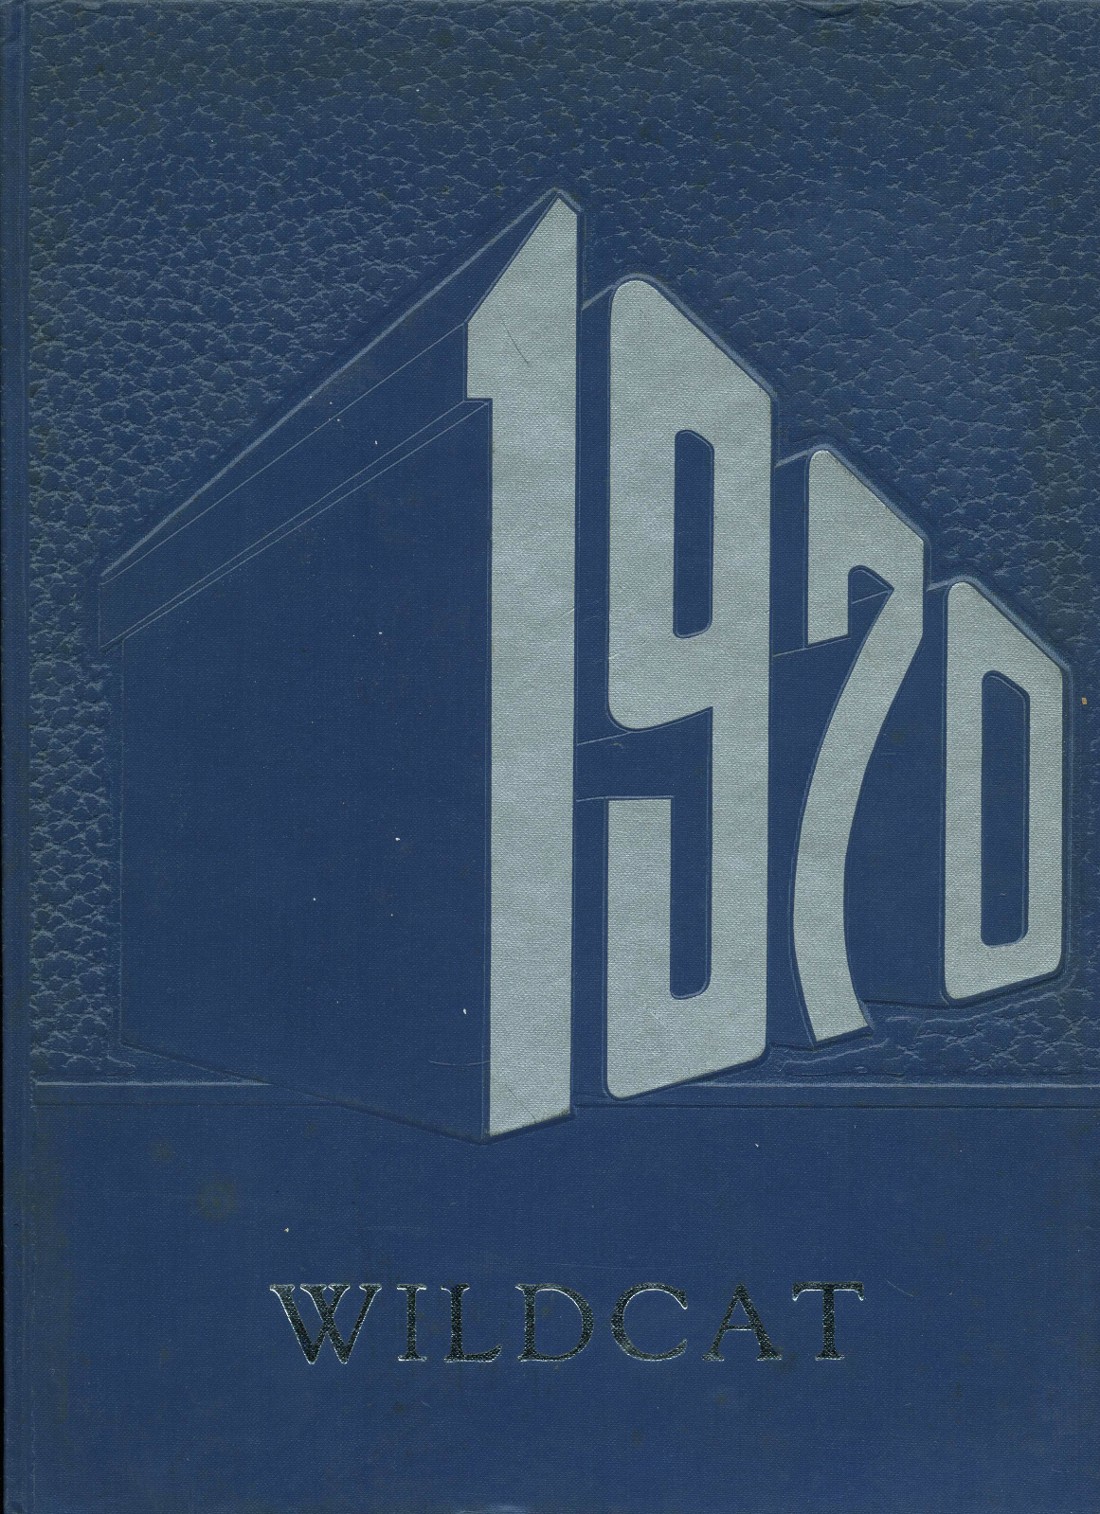 1970 yearbook from Rains High School from Emory, Texas for sale